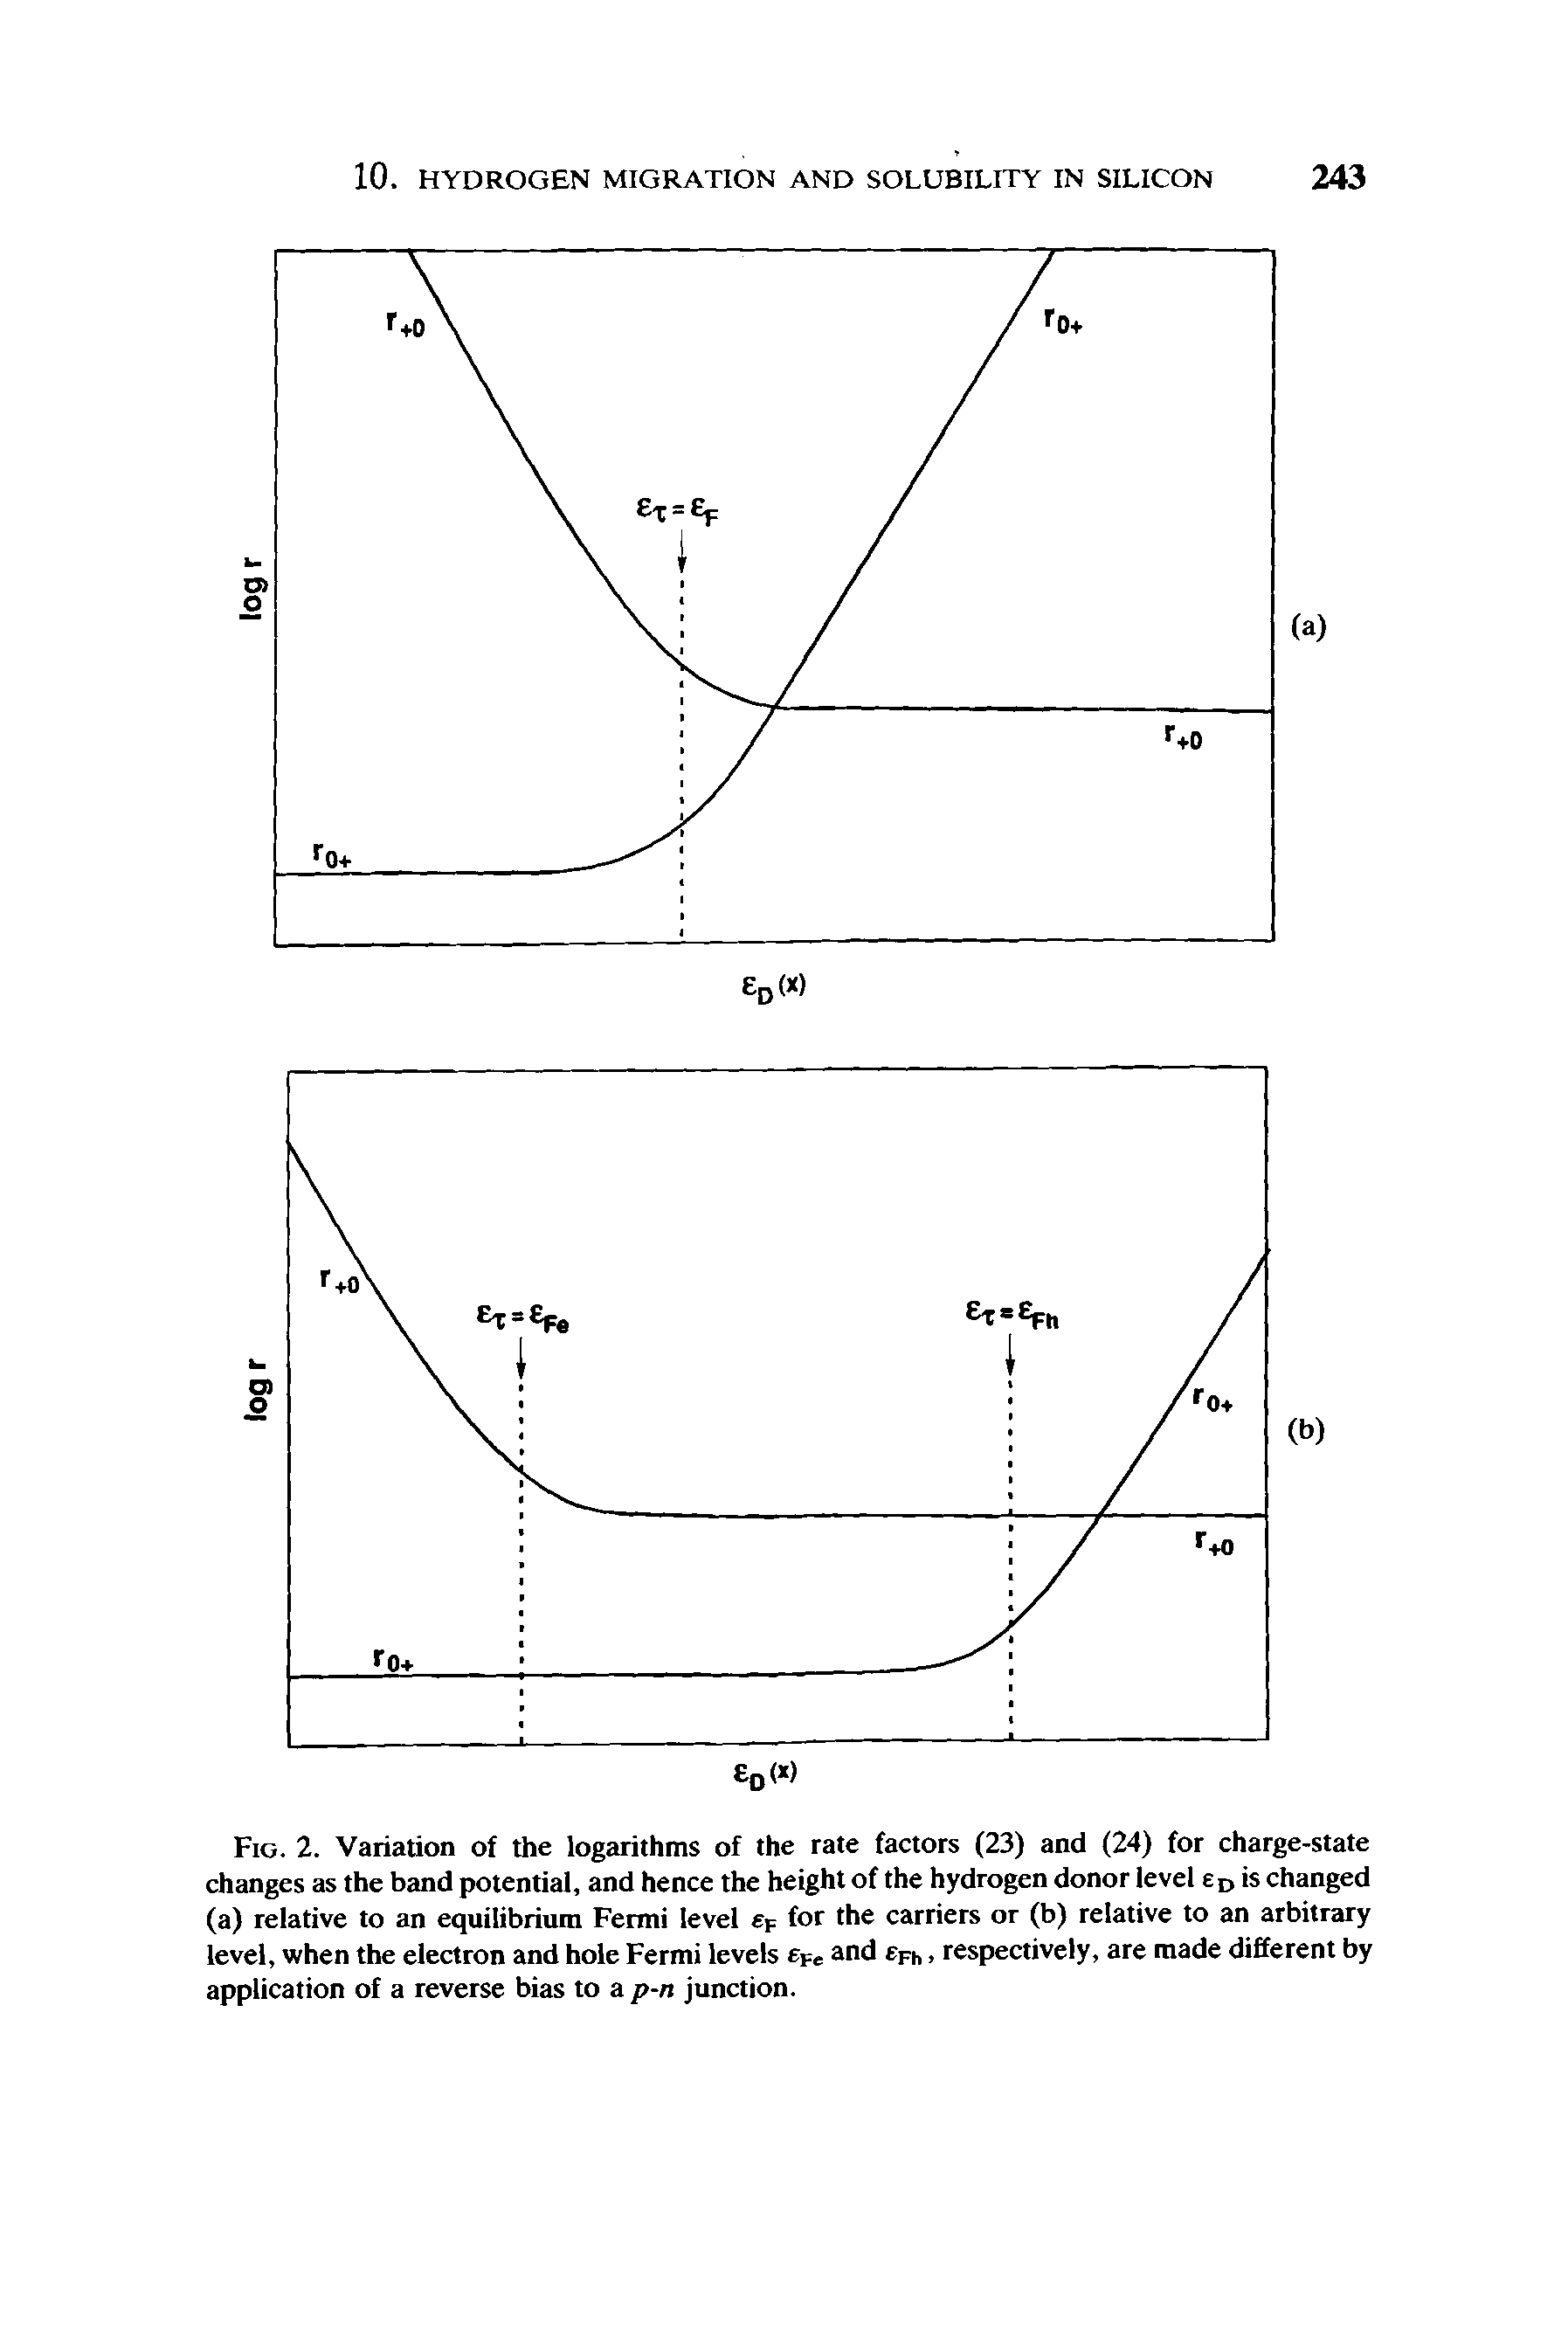 Fig. 2. Variation of the logarithms of the rate factors (23) and (24) for charge-state changes as the band potential, and hence the height of the hydrogen donor level eD is changed (a) relative to an equilibrium Fermi level eF for the carriers or (b) relative to an arbitrary level, when the electron and hole Fermi levels eFe and rFh, respectively, are made different by application of a reverse bias to a p-n junction.